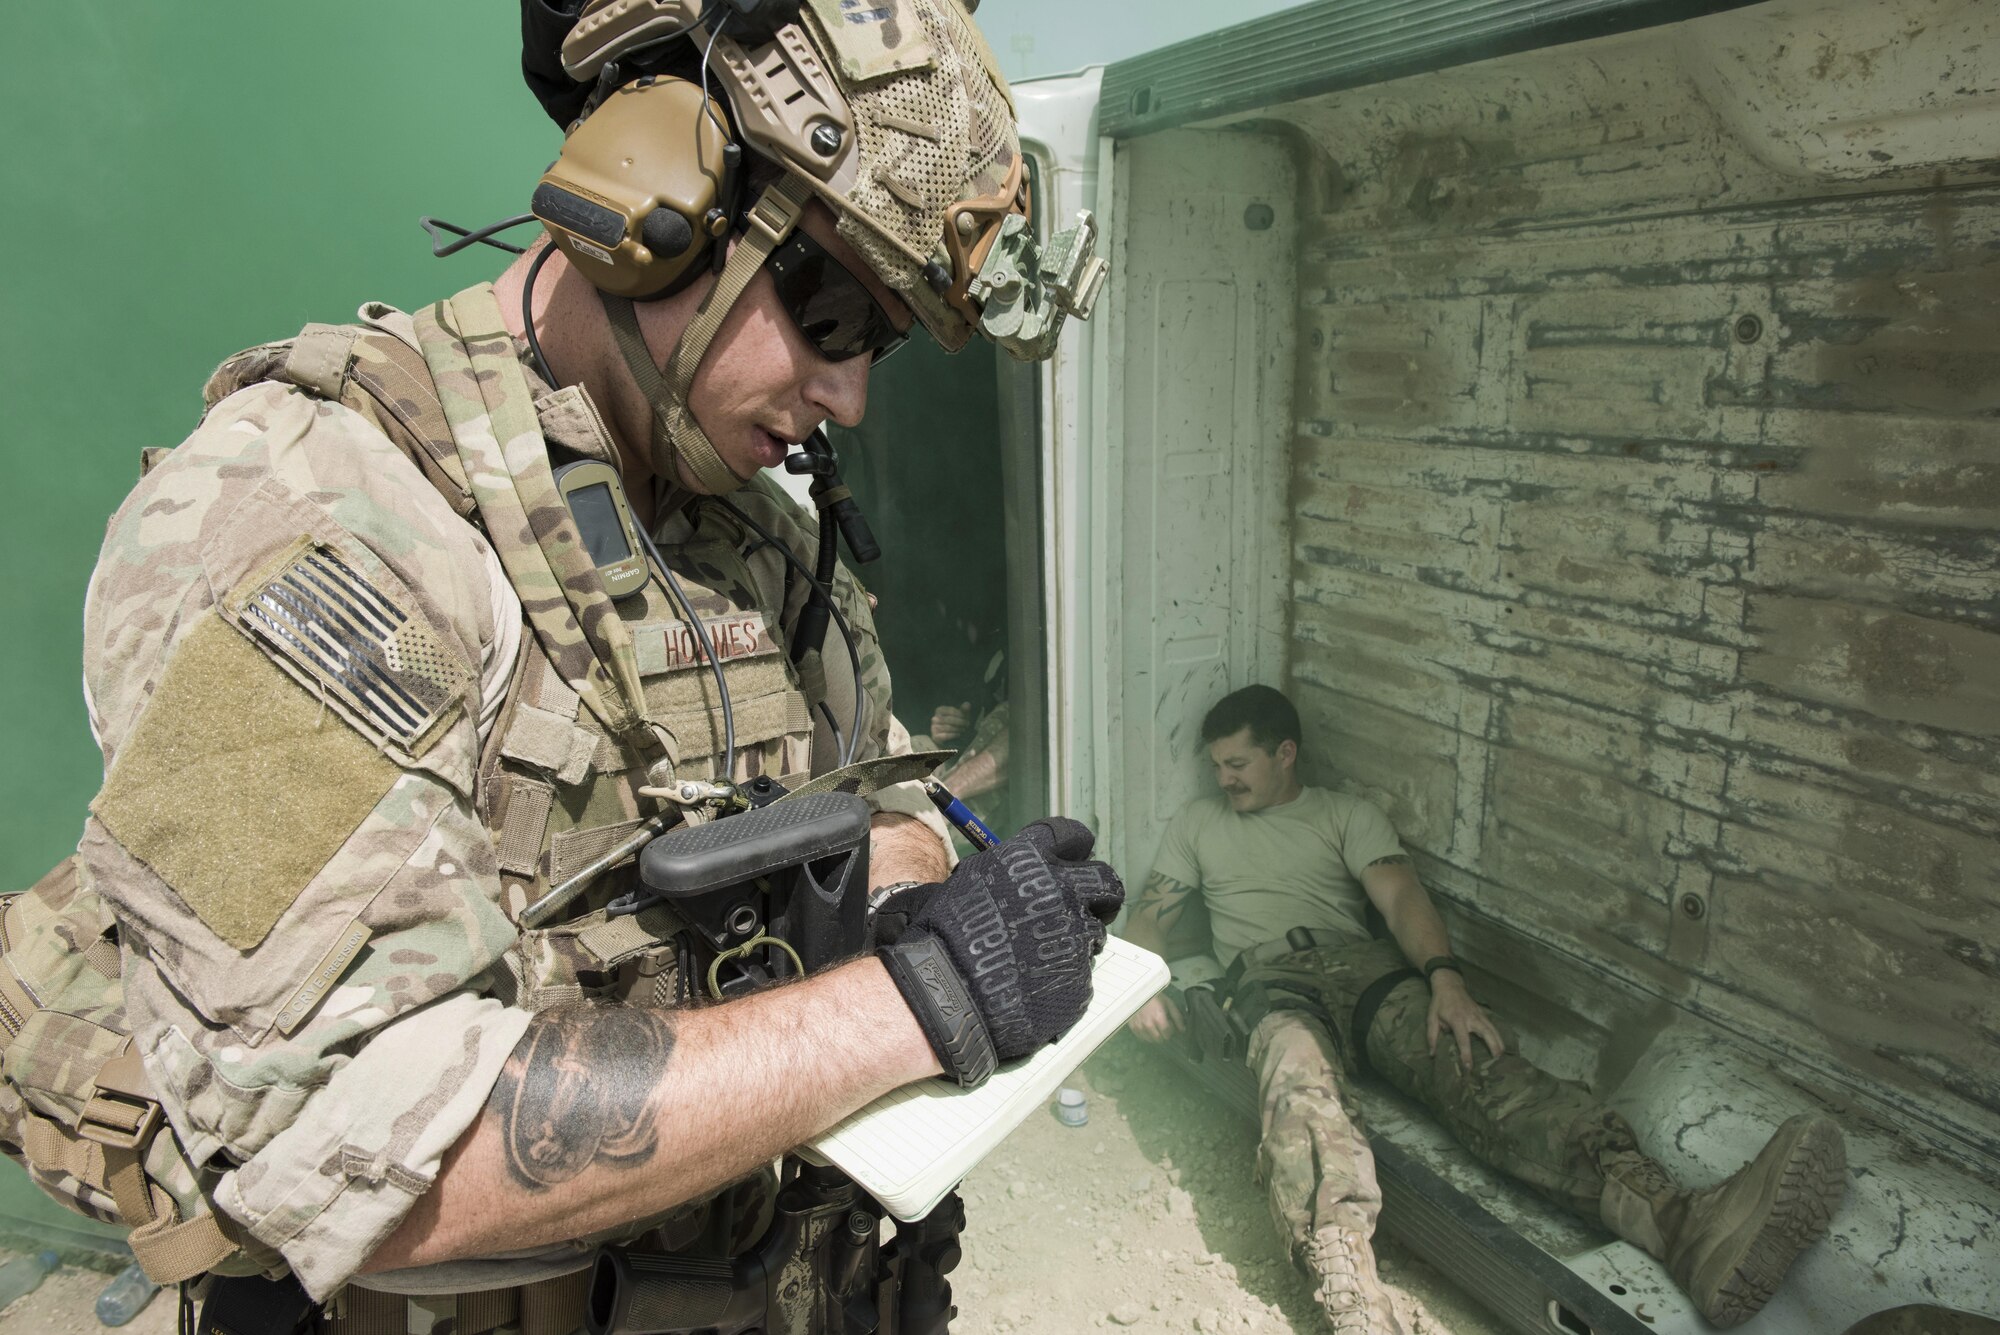 Senior Airman Travis Holmes, 83rd Expeditionary Rescue Squadron pararescue specialist, assess the scene and annotates the wounded, during a joint mass casualty and extraction exercise, June 16, 2016 at Bagram Airfield, Afghanistan. Airmen from the 83rd ERQS, paired with soldiers from Task Force Chosen to increase interoperability with each other and demonstrate theater personnel recovery capabilities. (U.S. Air Force photo by Tech. Sgt. Tyrona Lawson)